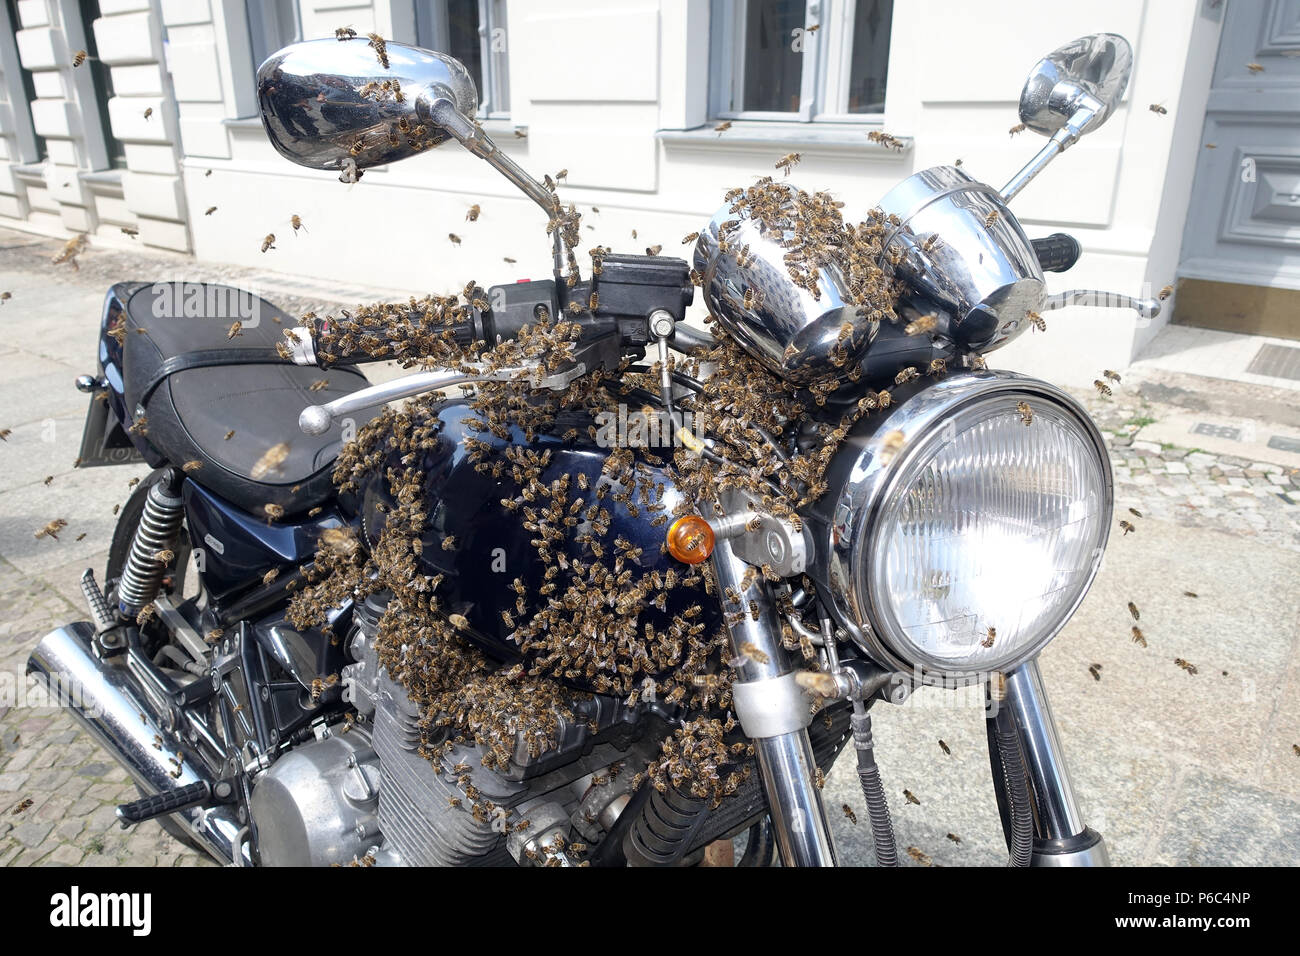 Berlin Kreuzberg, A swarm of bees has sat on a motorcycle and is captured Stock Photo